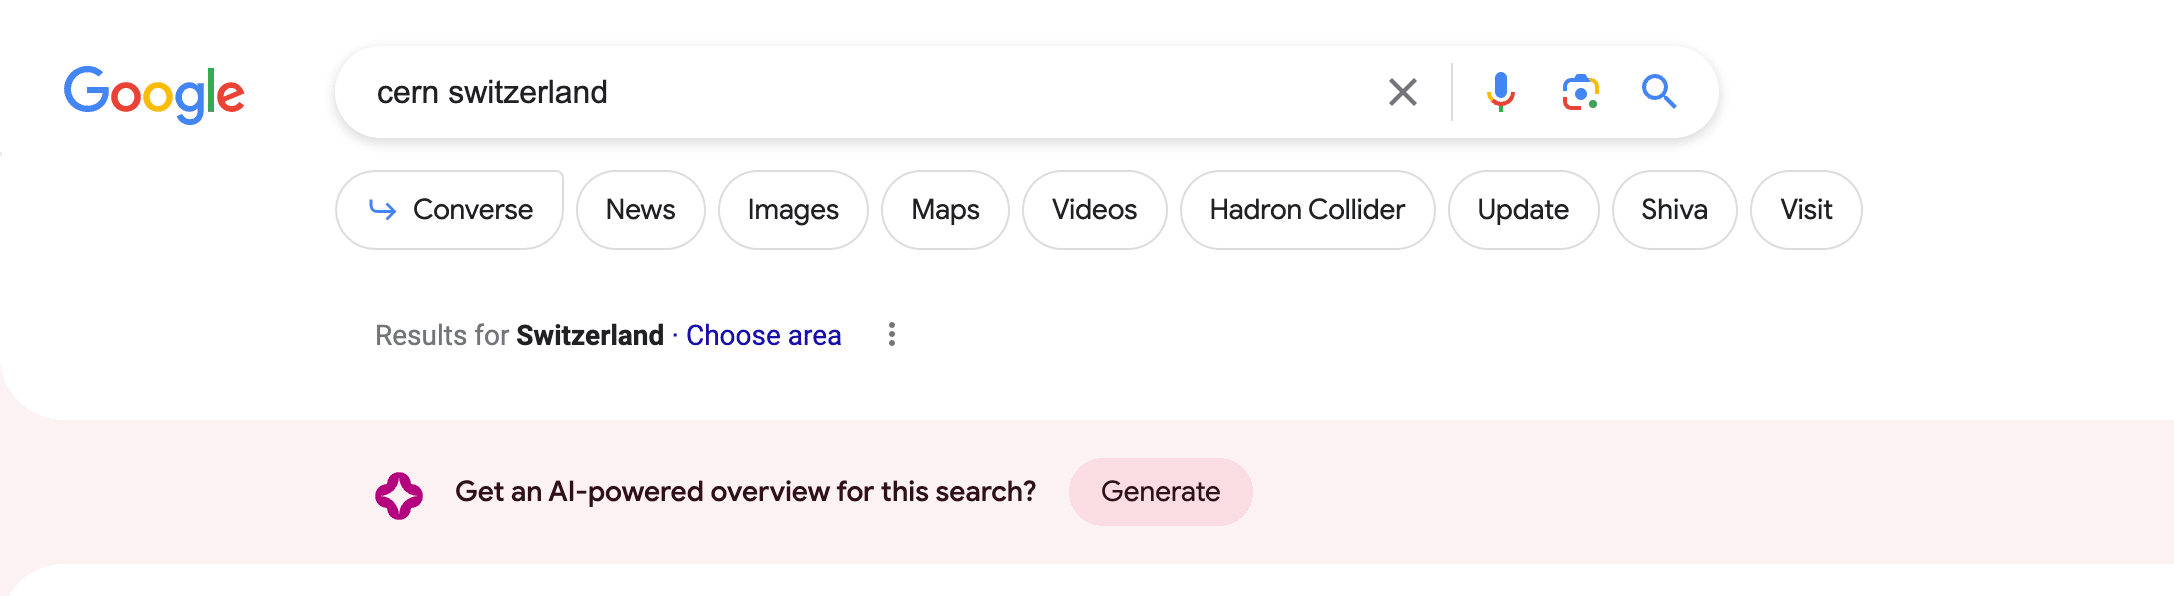 Get an AI-powered overview of this search message for navigational query